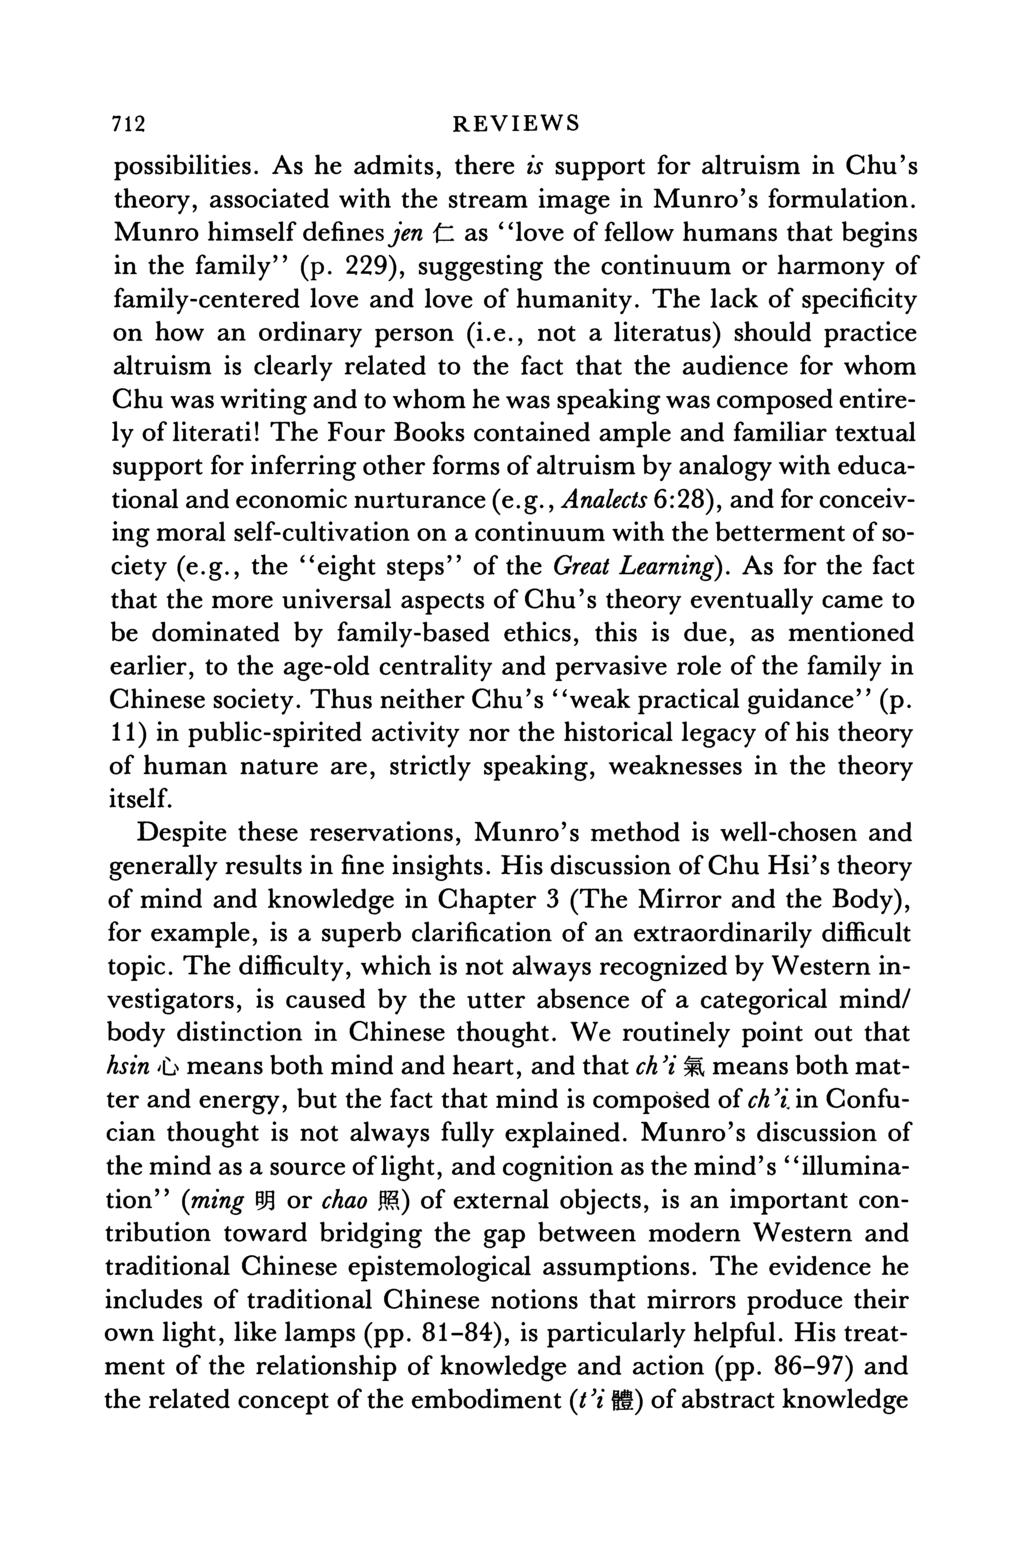 712 REVIEWS possibilities. As he admits, there is support for altruism in Chu's theory, associated with the stream image in Munro's formulation.